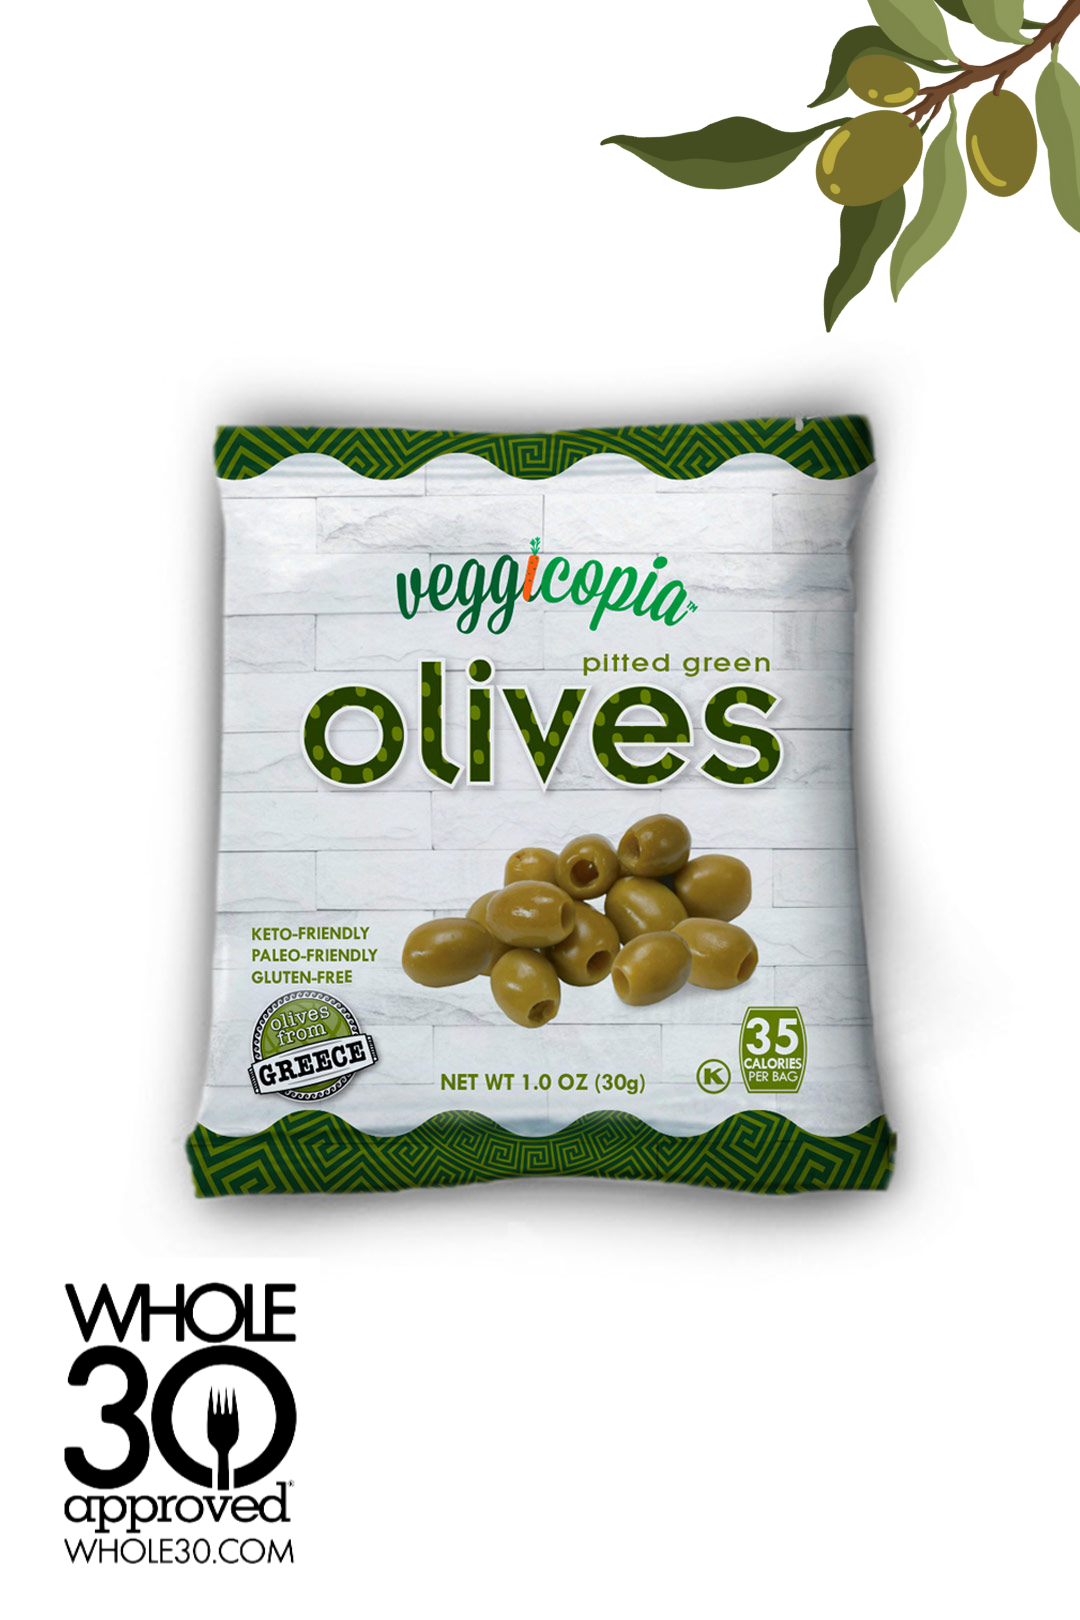 [VeggieCopia] Green Olives from Greece 1oz